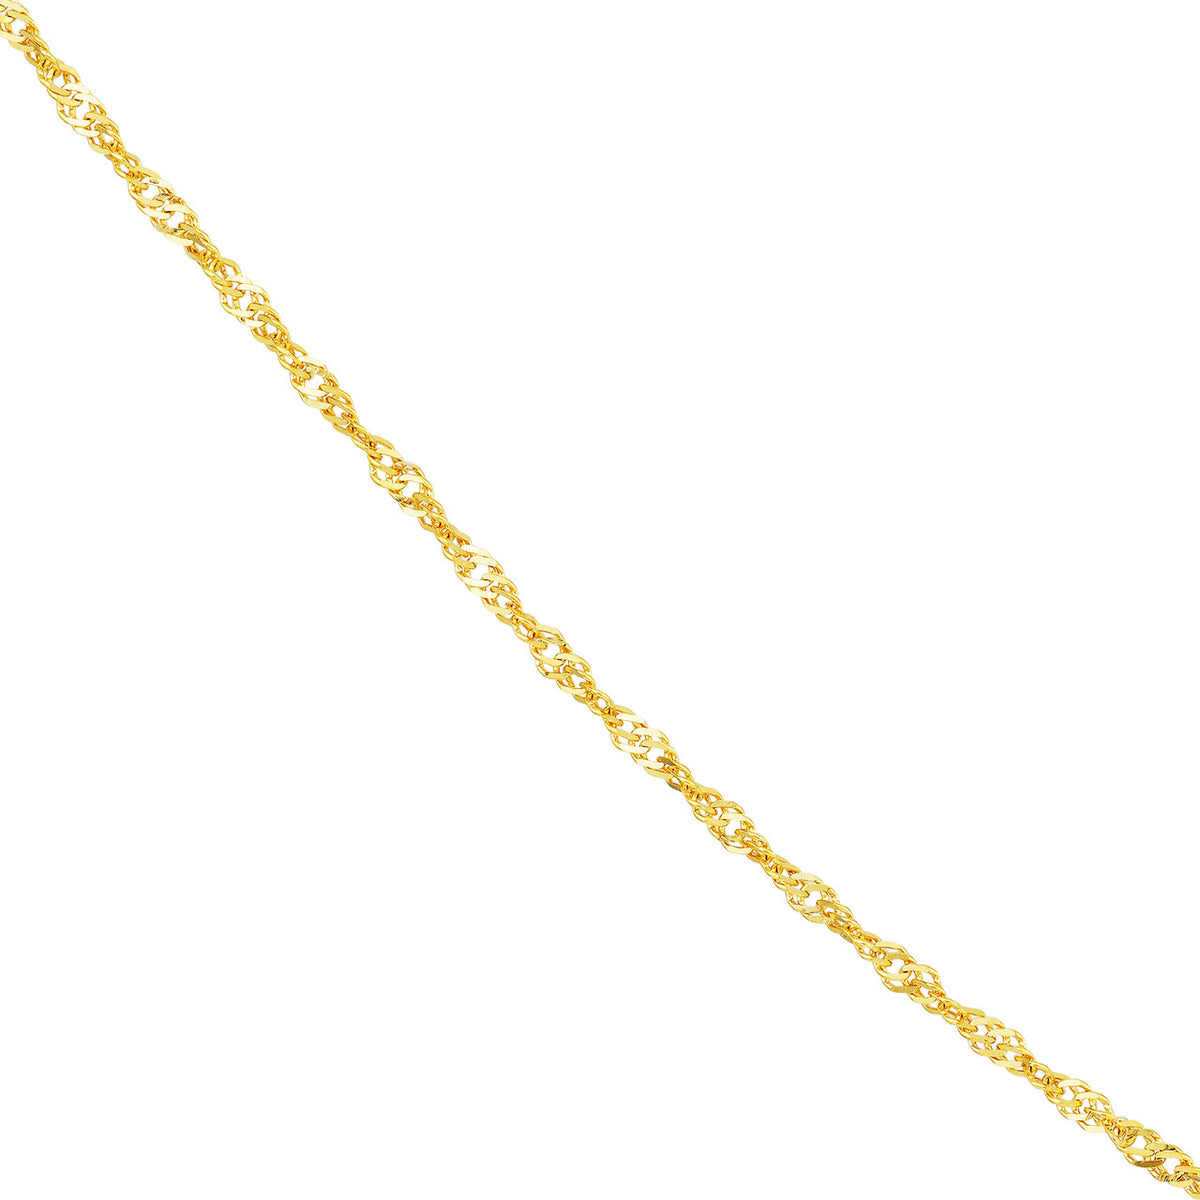 14K Yellow Gold or White Gold 1.4mm Singapore Chain Necklace with Spring Ring